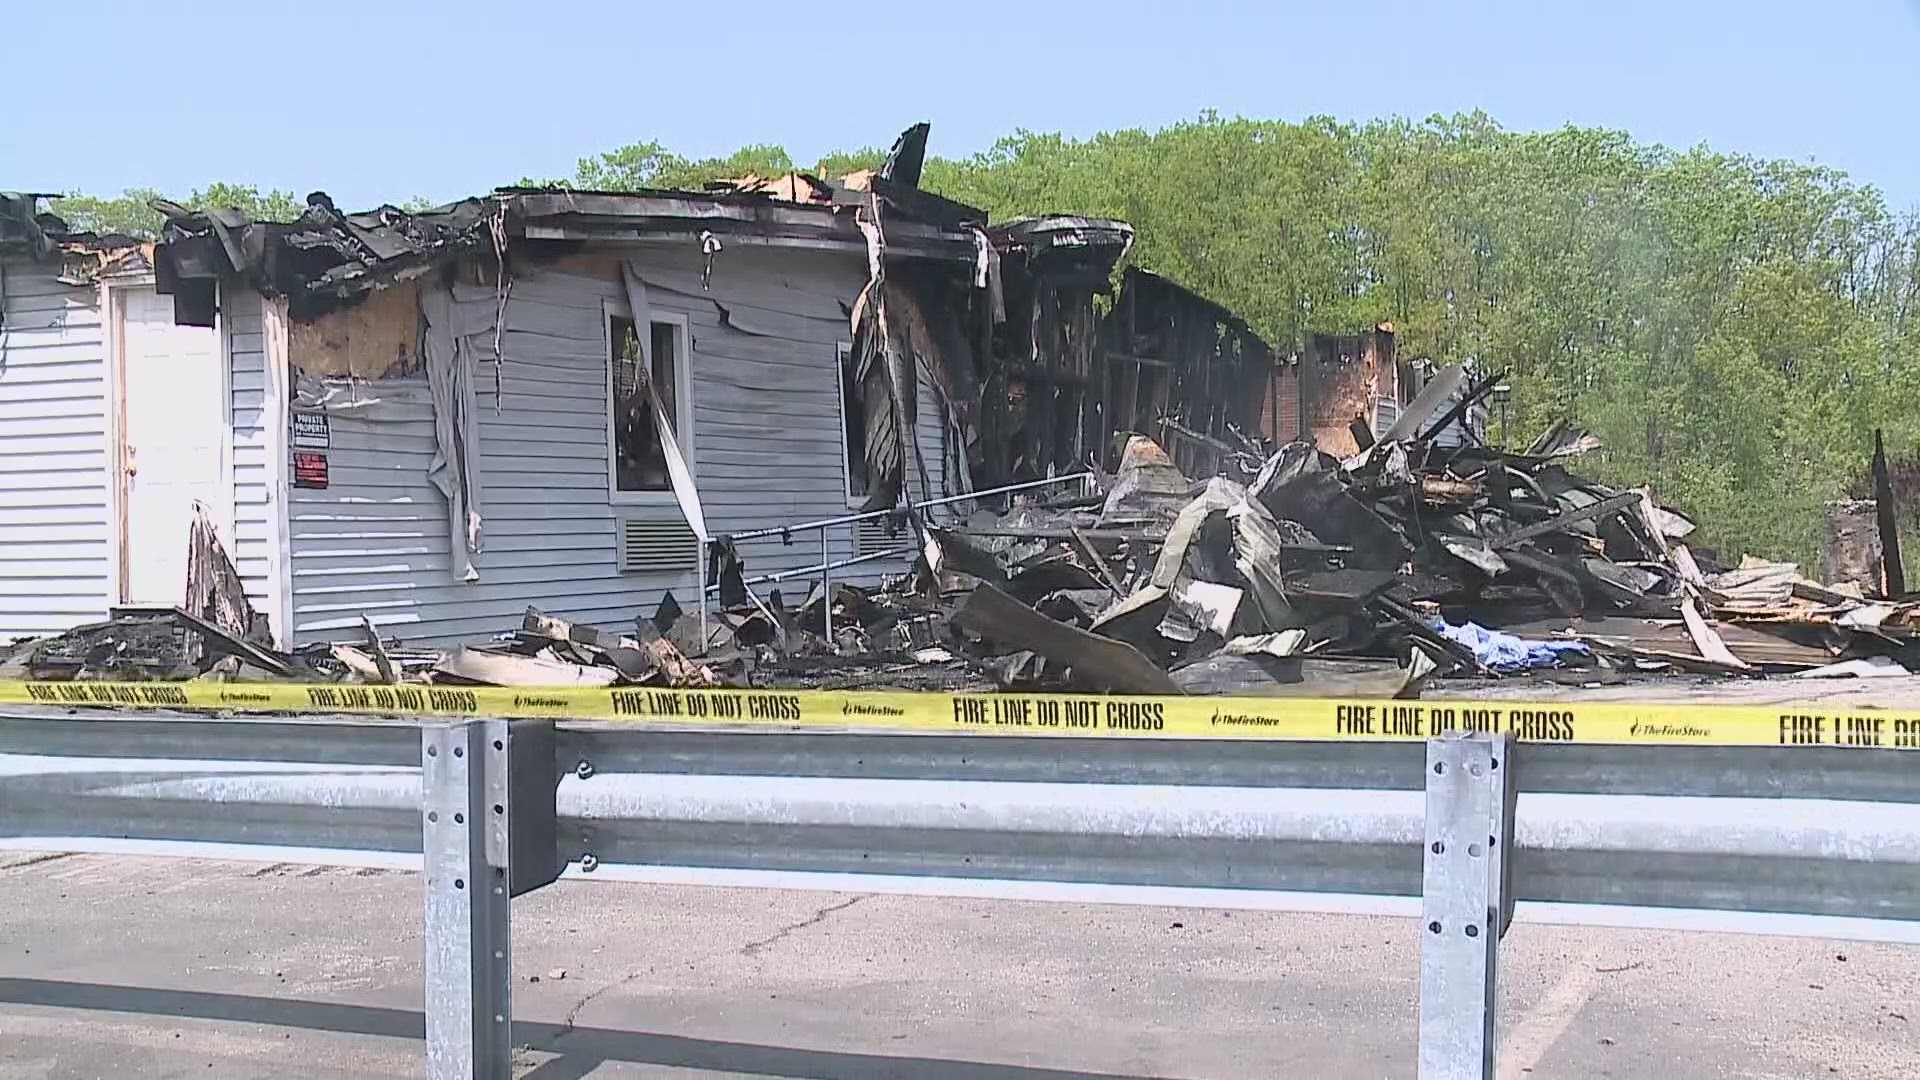 As of Friday night, investigators had not released a cause for the fire where one person was found dead.